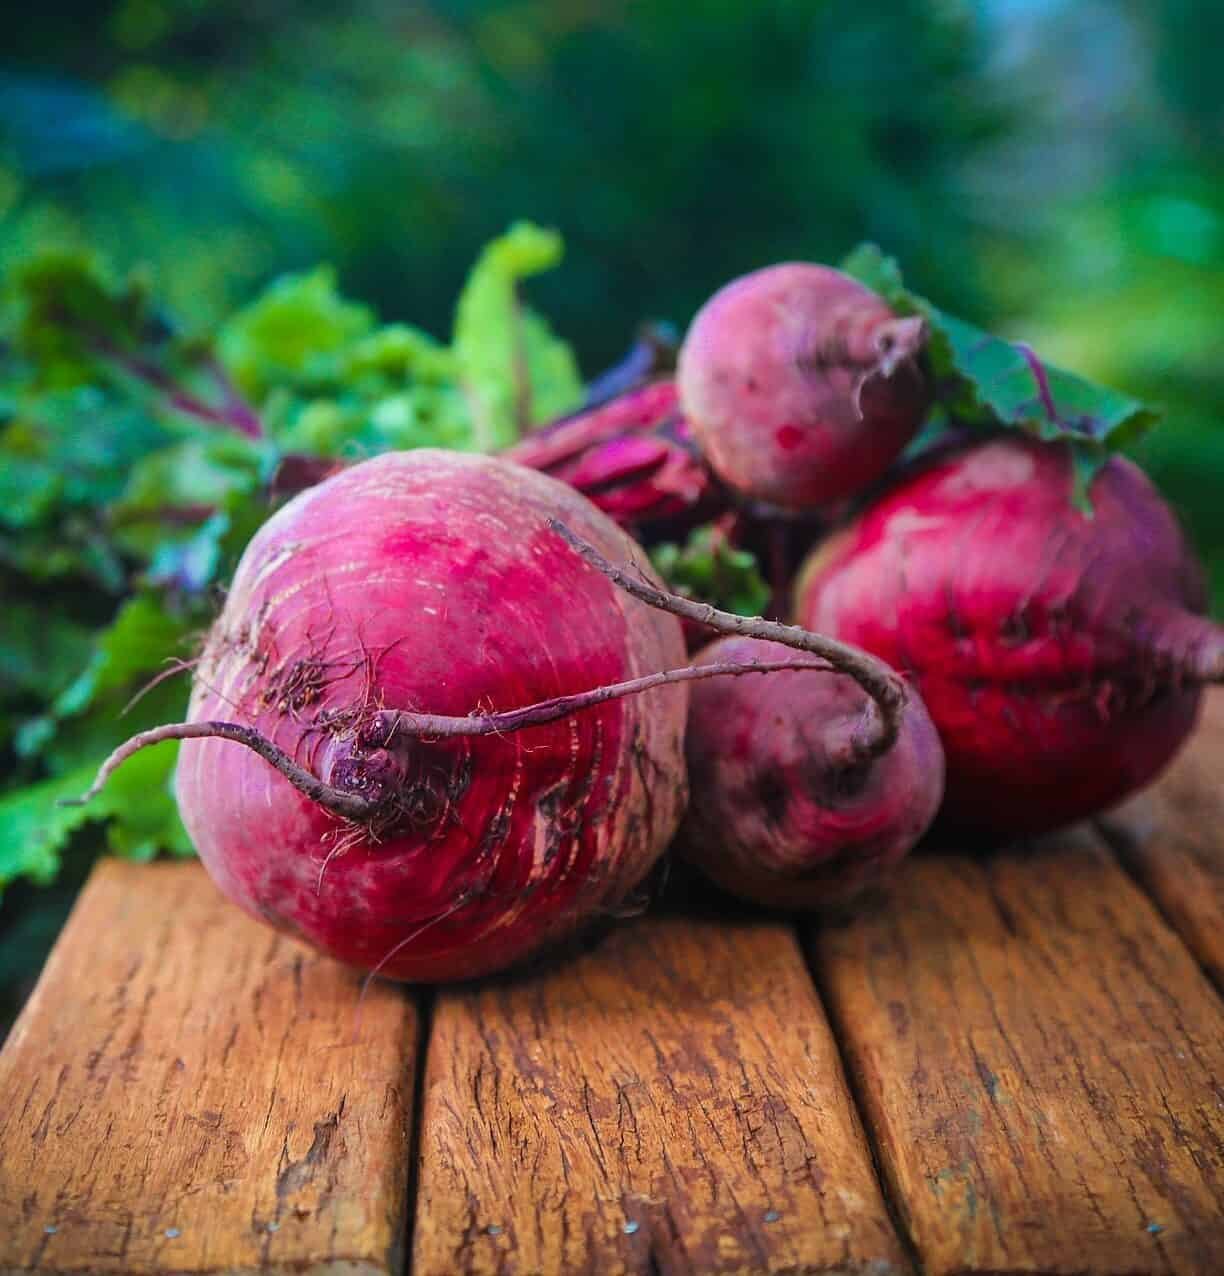 snapshot of beetroots outdoor on wooden table